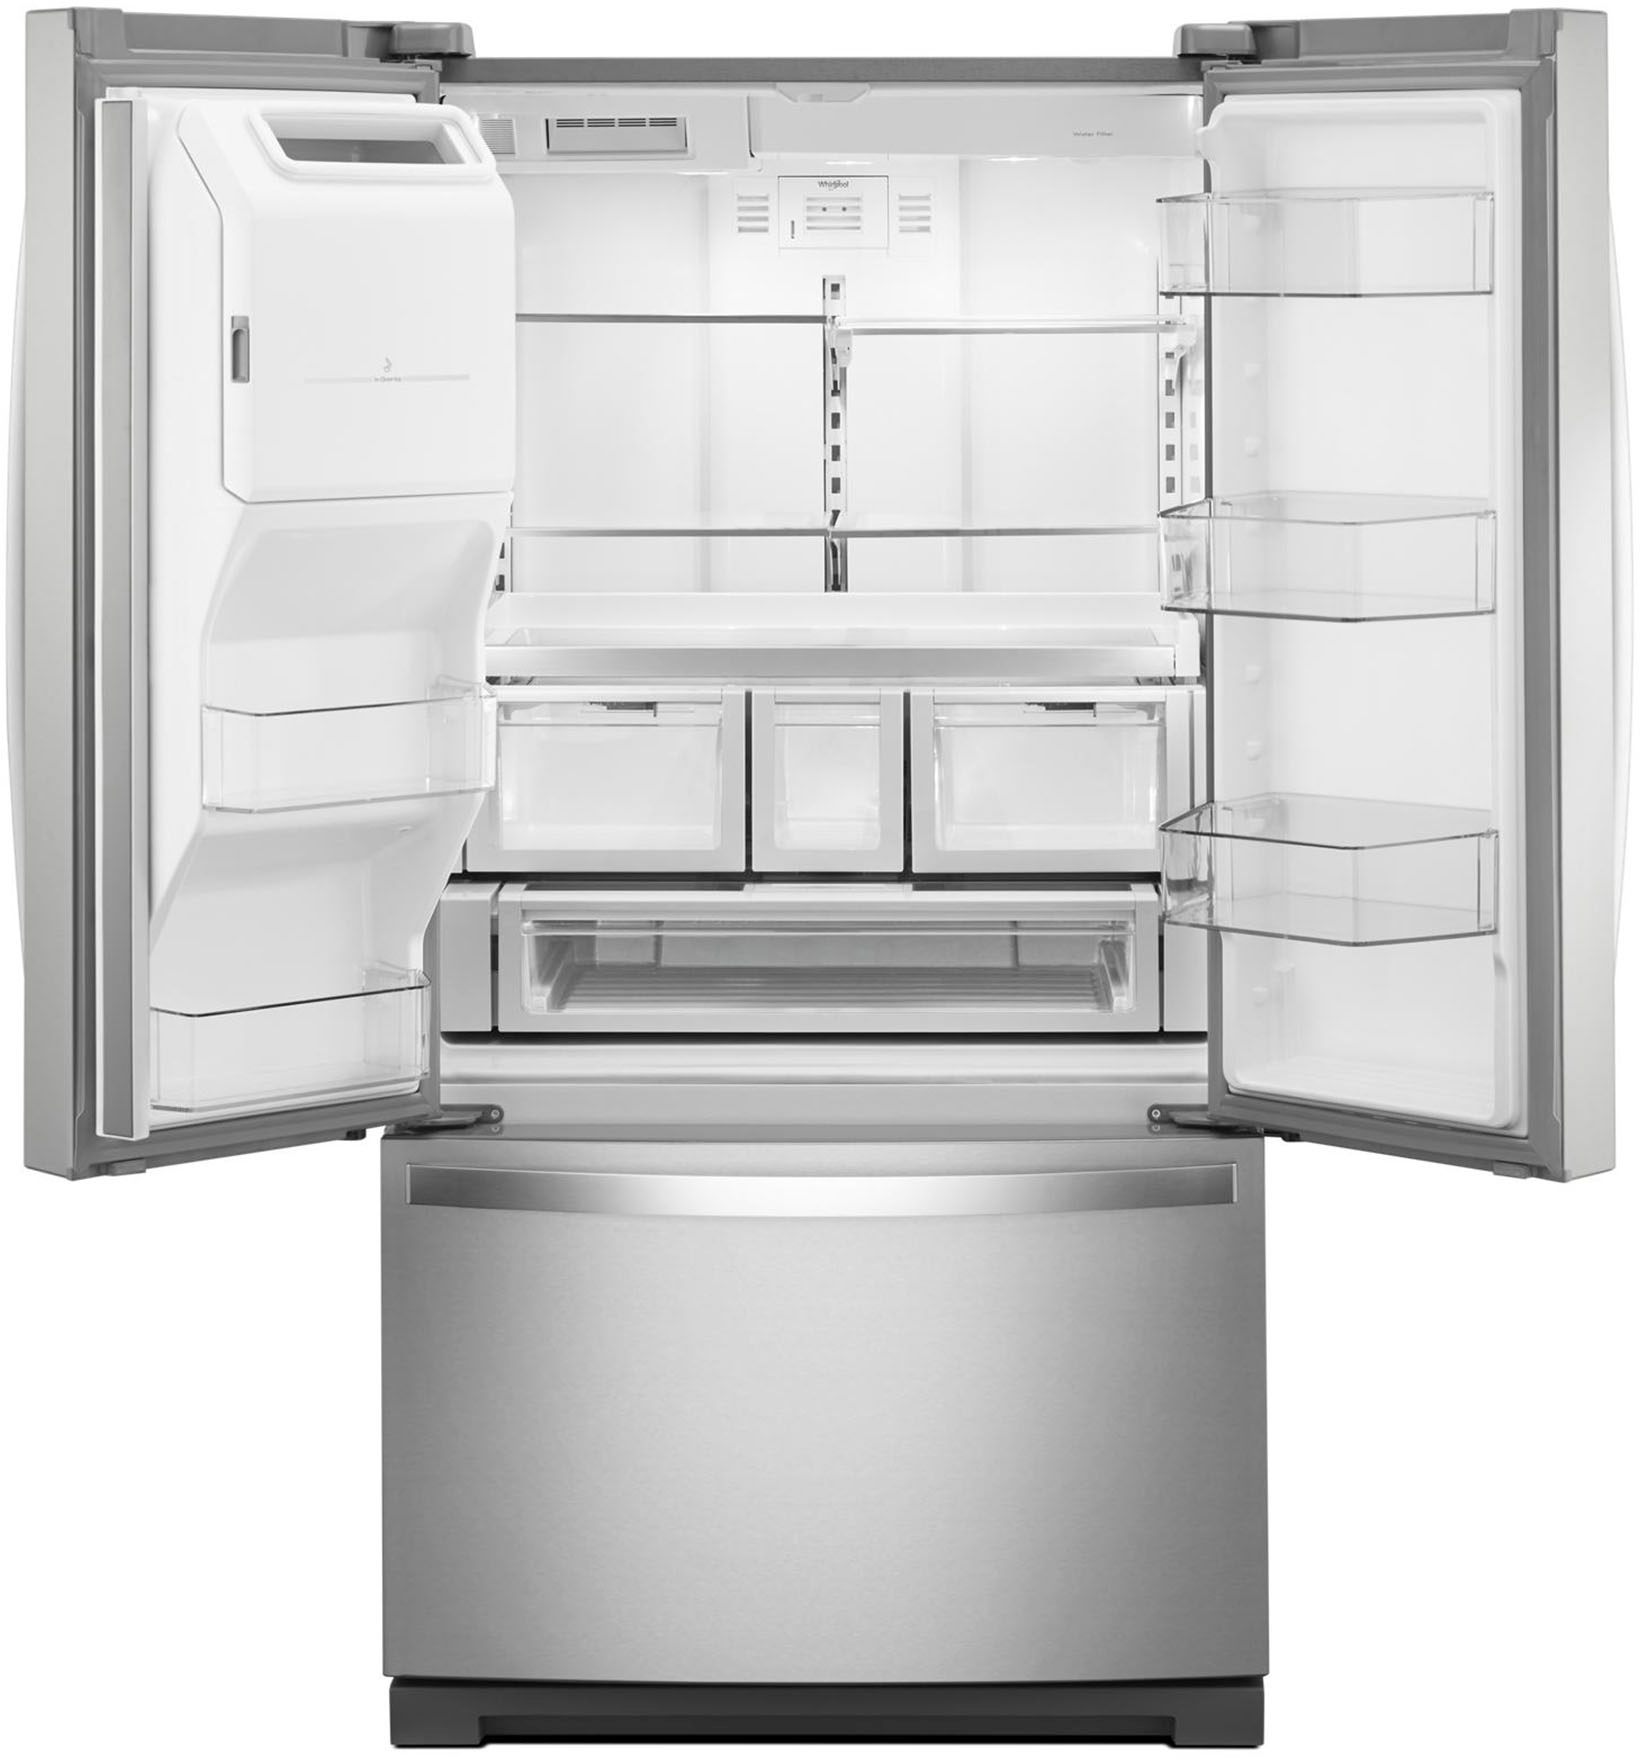 Angle View: Whirlpool - 26.8 Cu. Ft. French Door Refrigerator - Stainless Steel